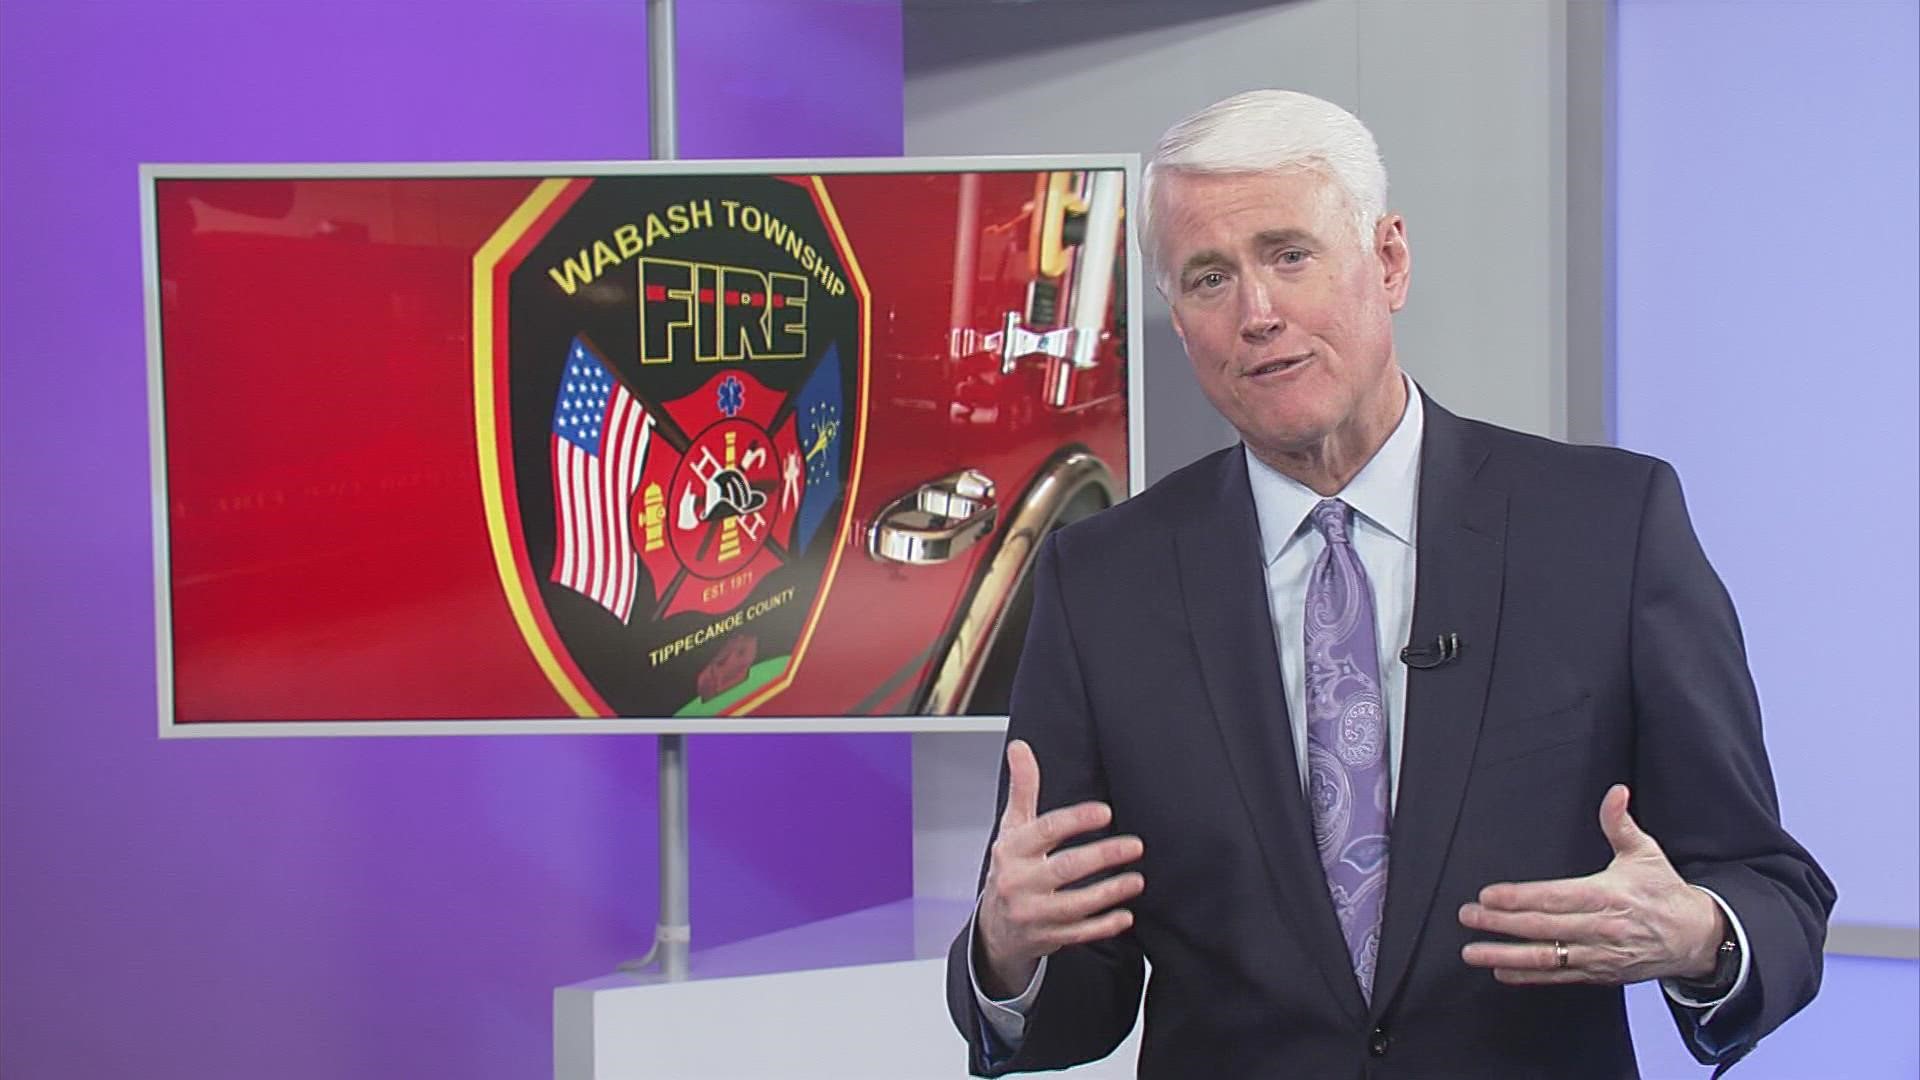 The interim Wabash Township Trustee told 13News he and board members are working to bring back the firefighters who lost their jobs over the summer.